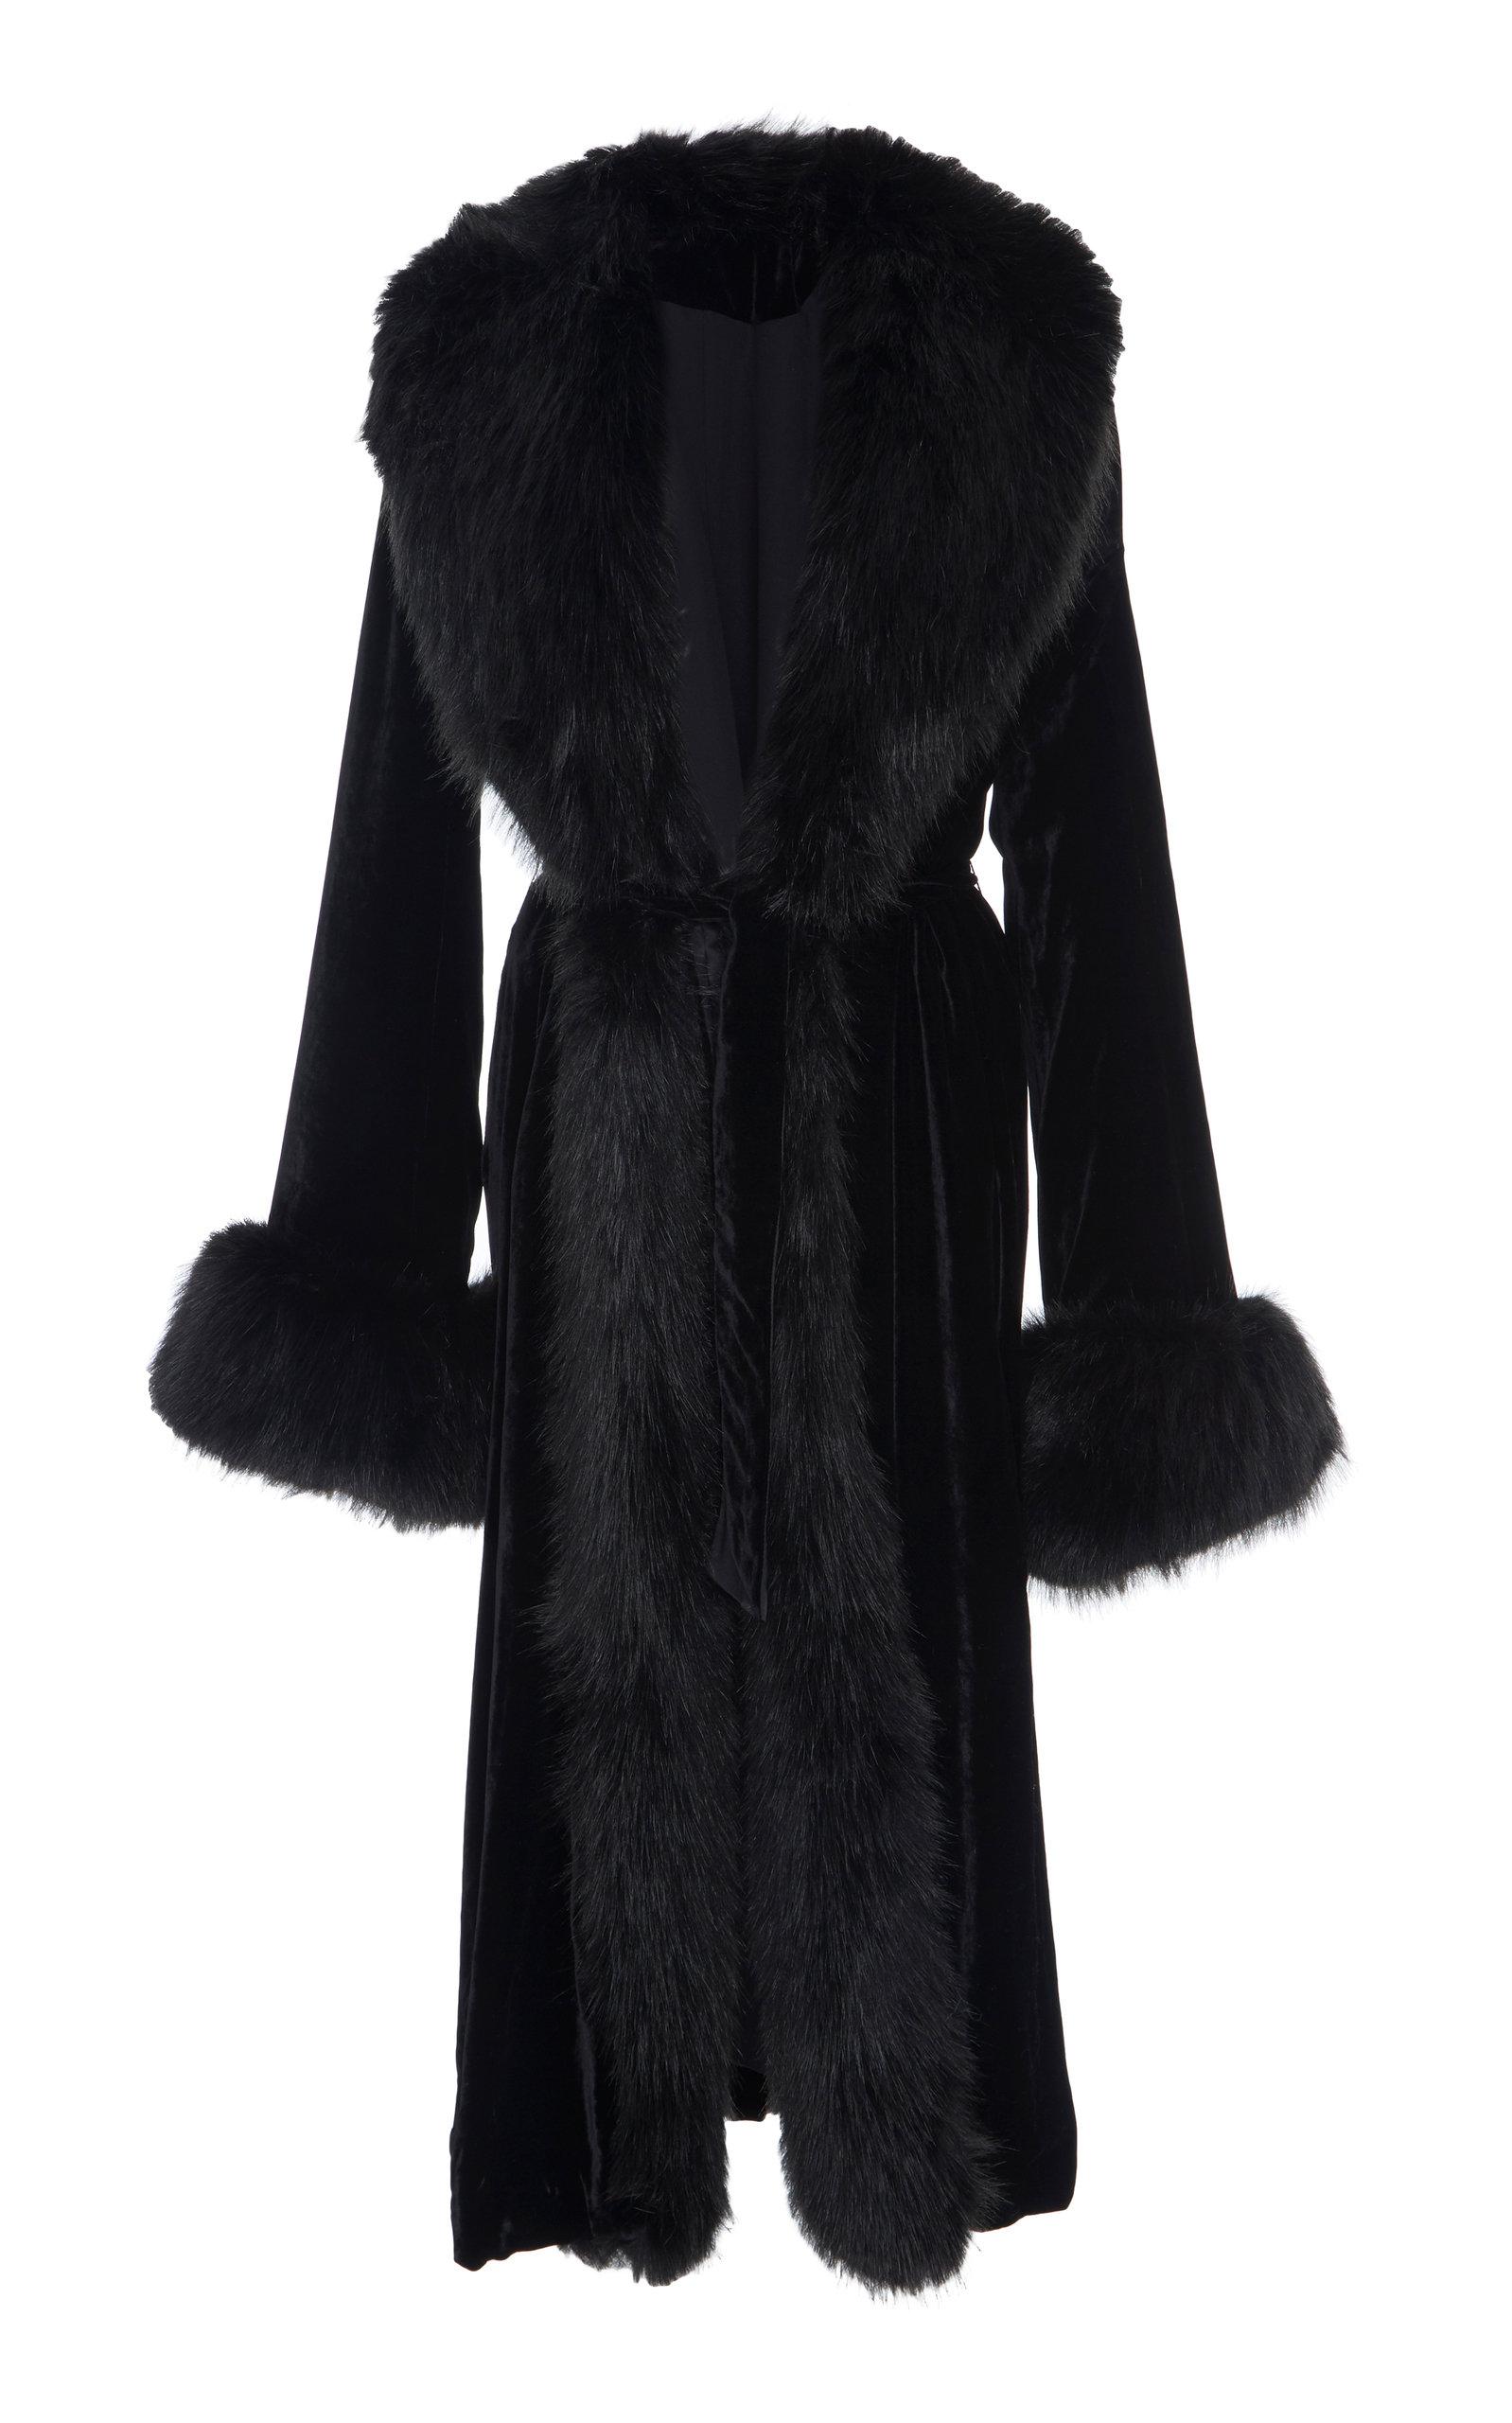 Marei 1998 Powderpuff Velvet Coat With Faux Fur Collar And Cuffs in ...